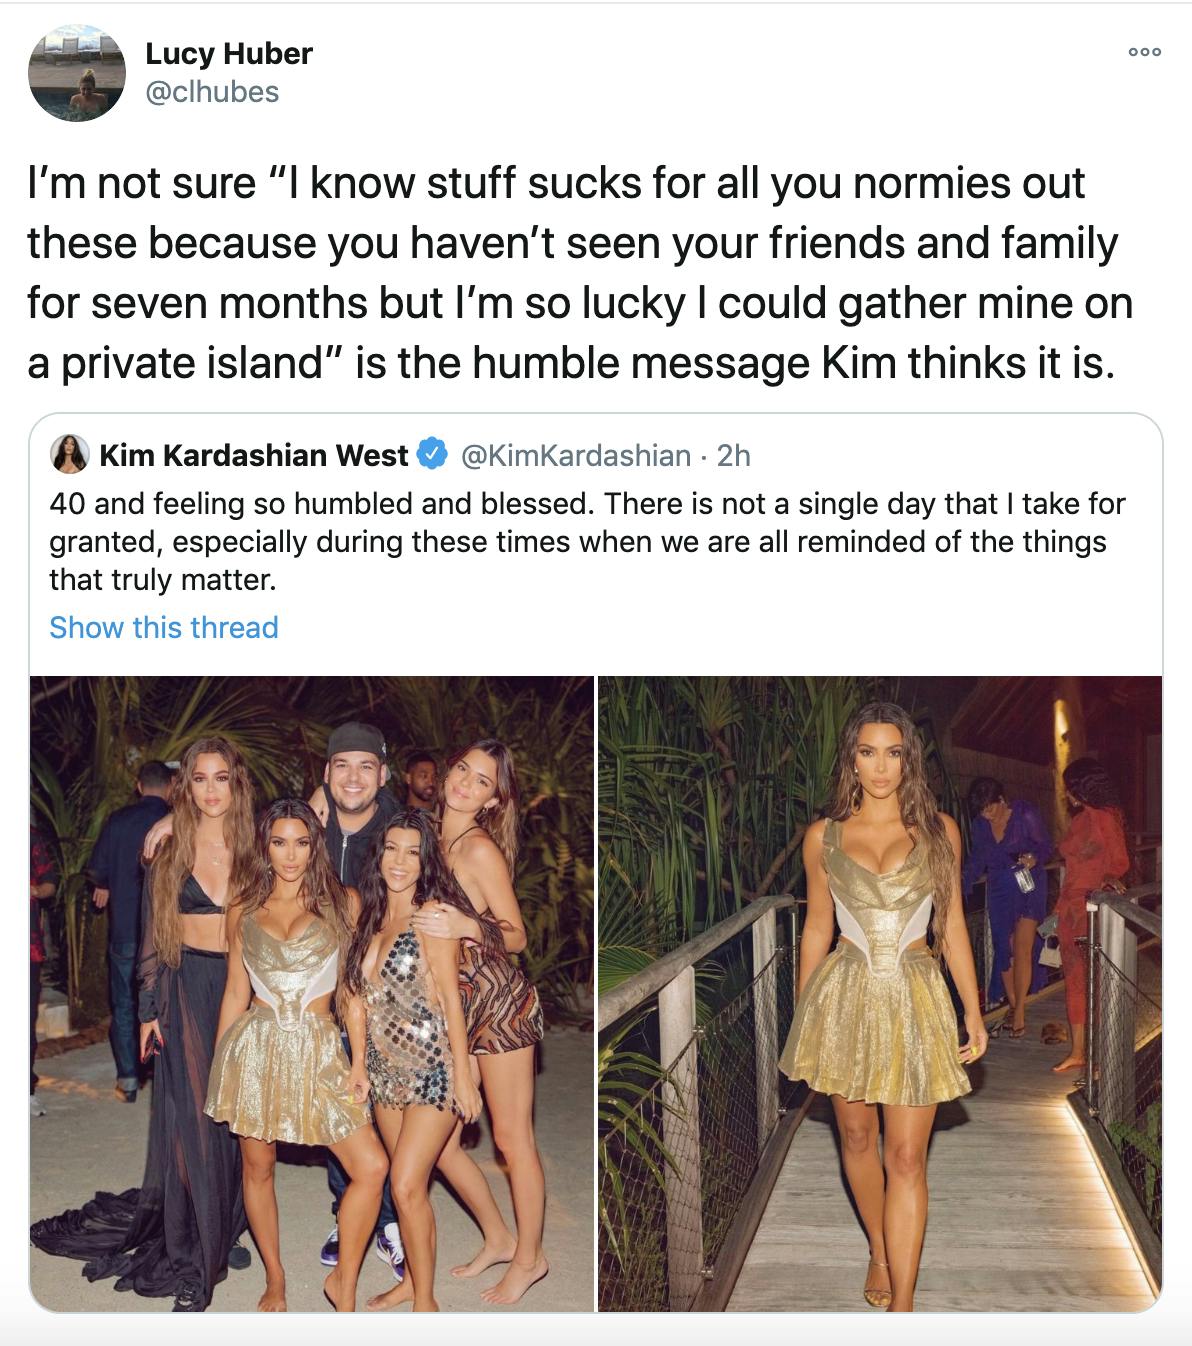 'I’m not sure “I know stuff sucks for all you normies out these because you haven’t seen your friends and family for seven months but I’m so lucky I could gather mine on a private island” is the humble message Kim thinks it is.' Kim Kardashian's first tweet is embedded